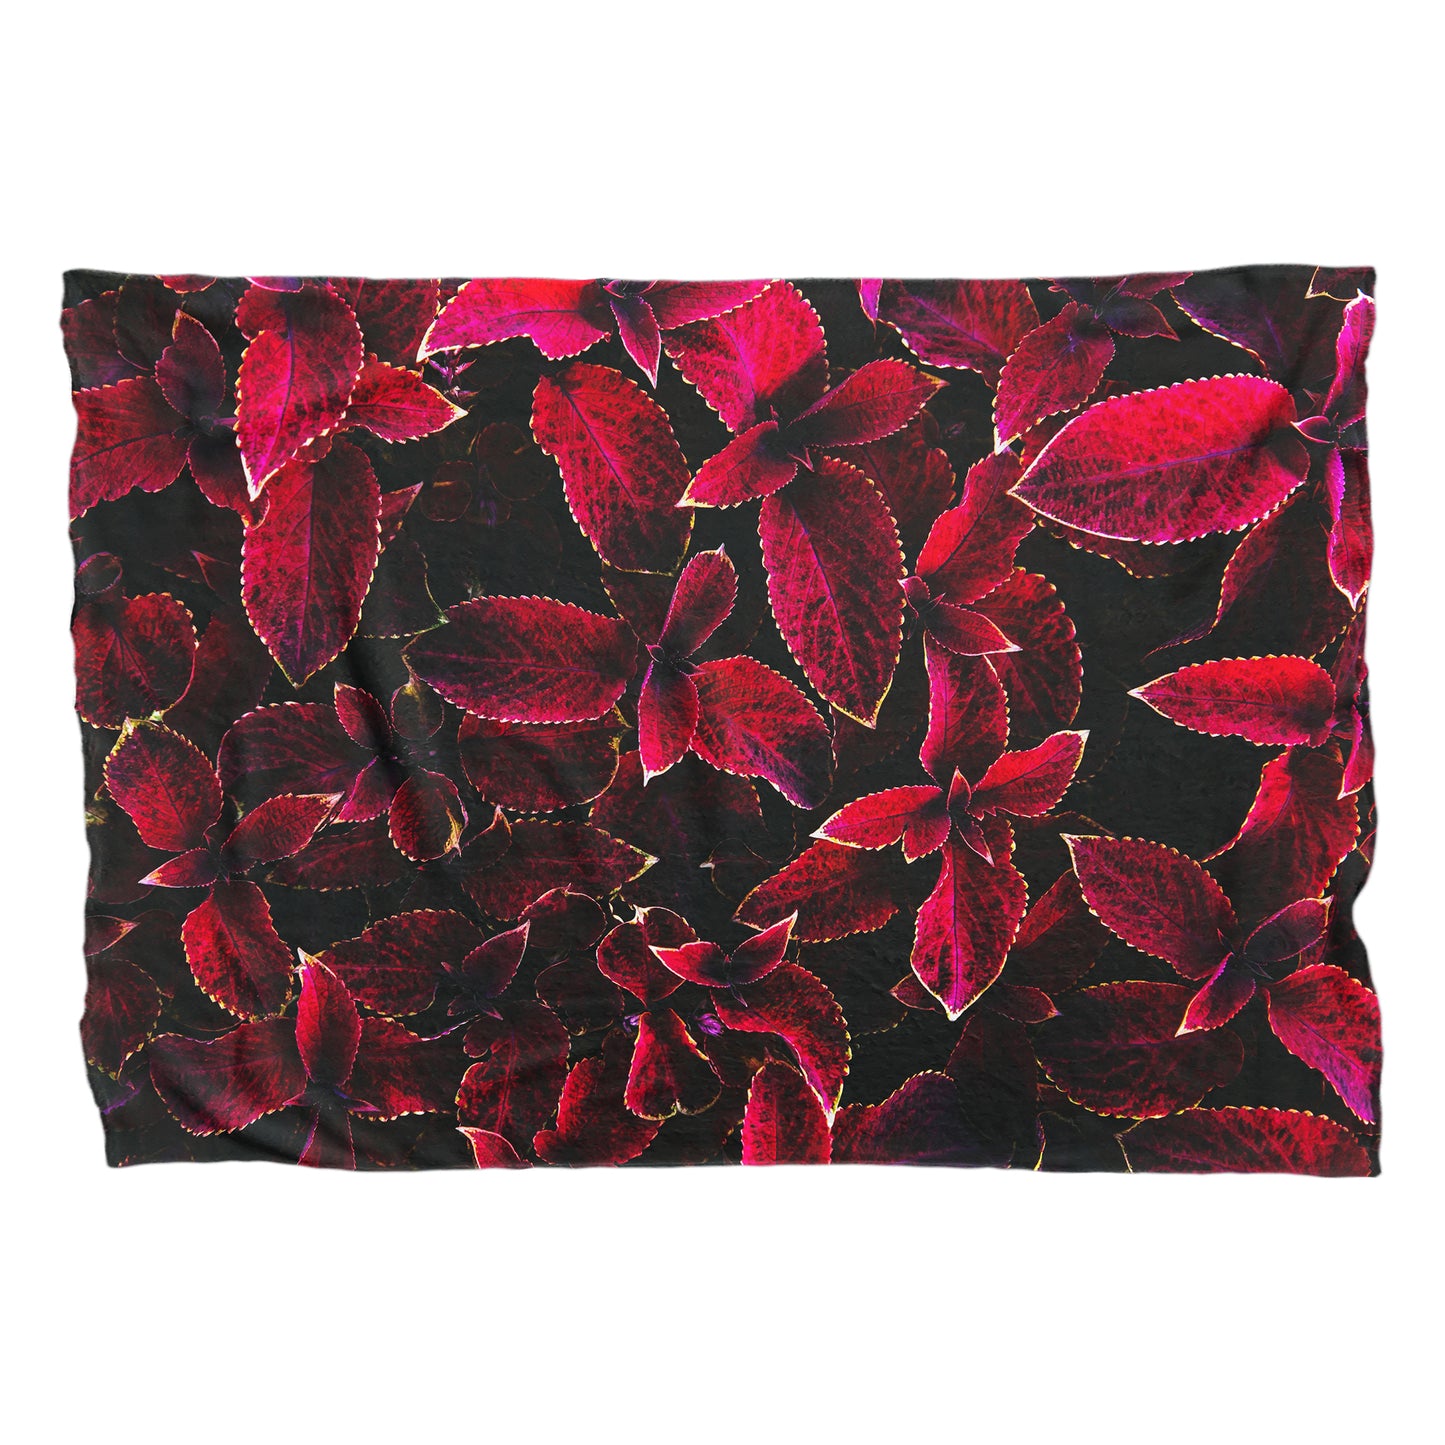 Ruby Leaves Large Light Weight Fleece